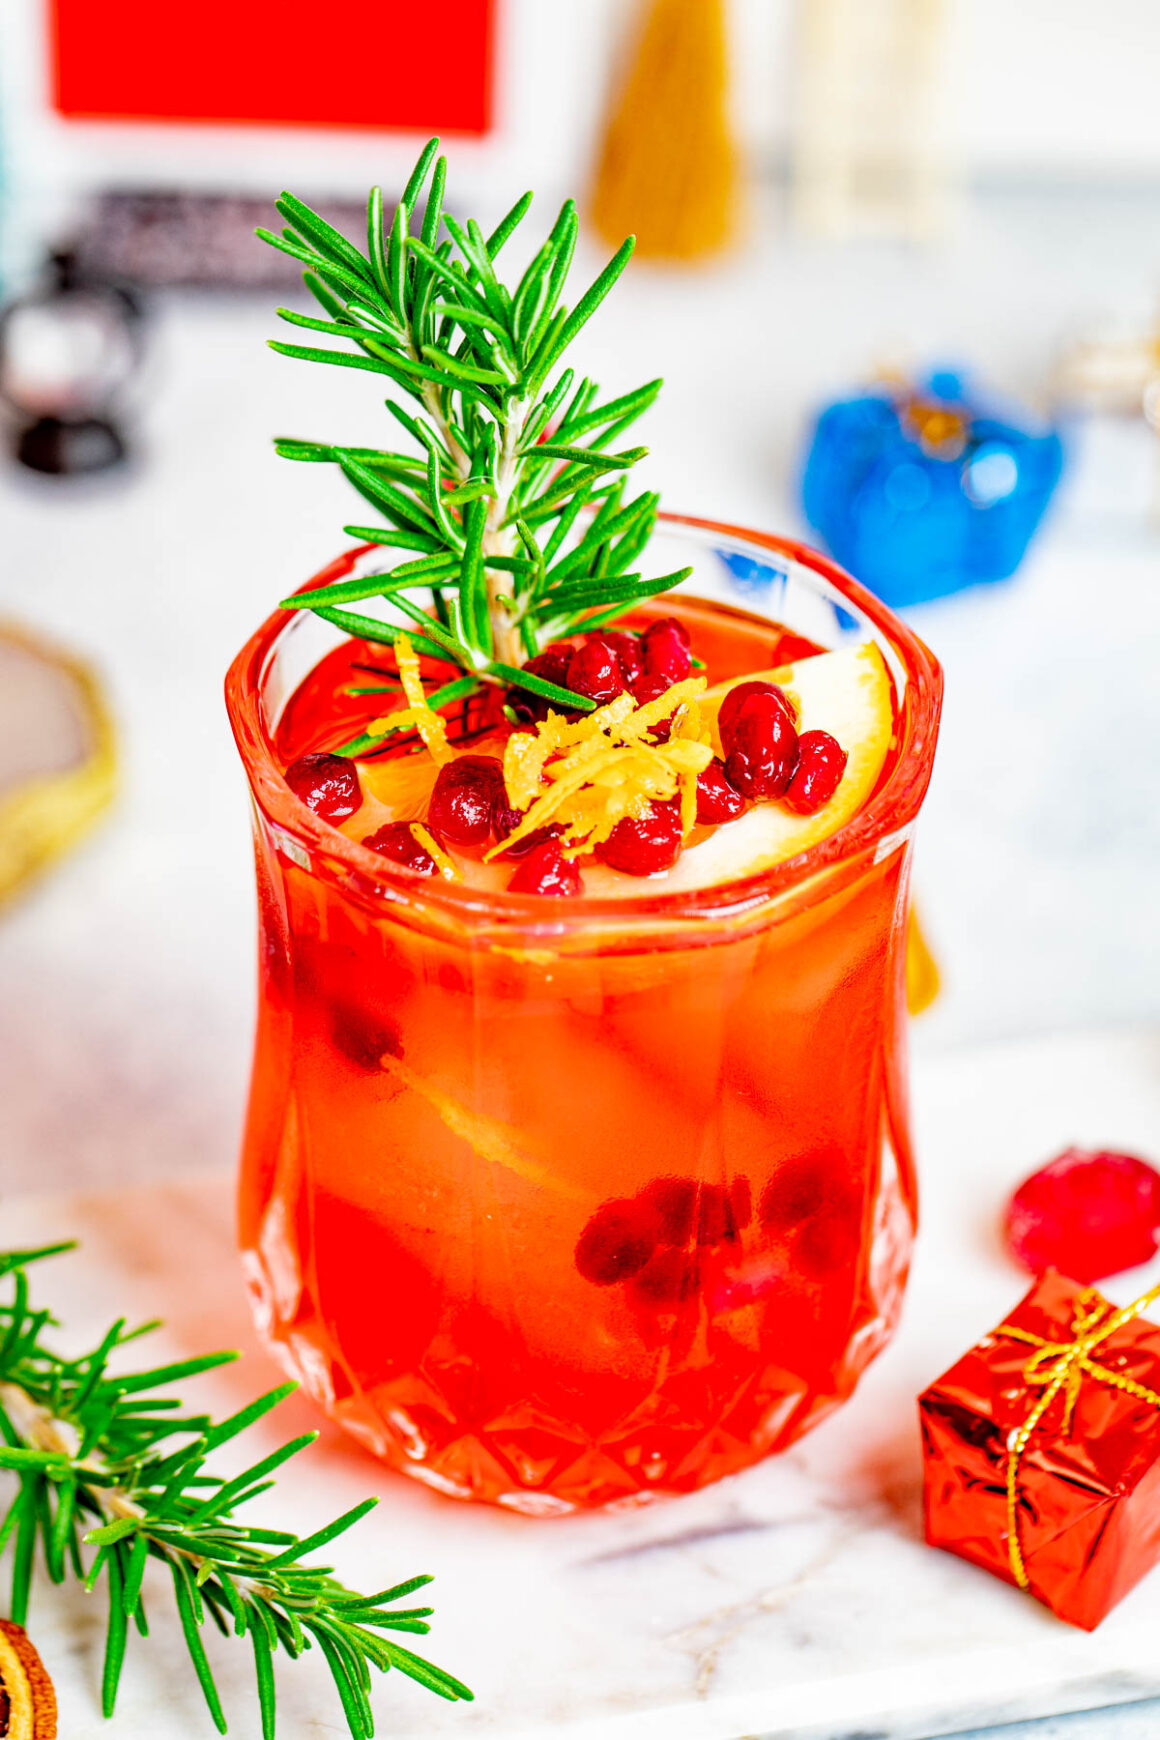 With its vibrant red hue, refreshing flavors, and symbolic pomegranate garnish, it's sure to be a hit with guests. 